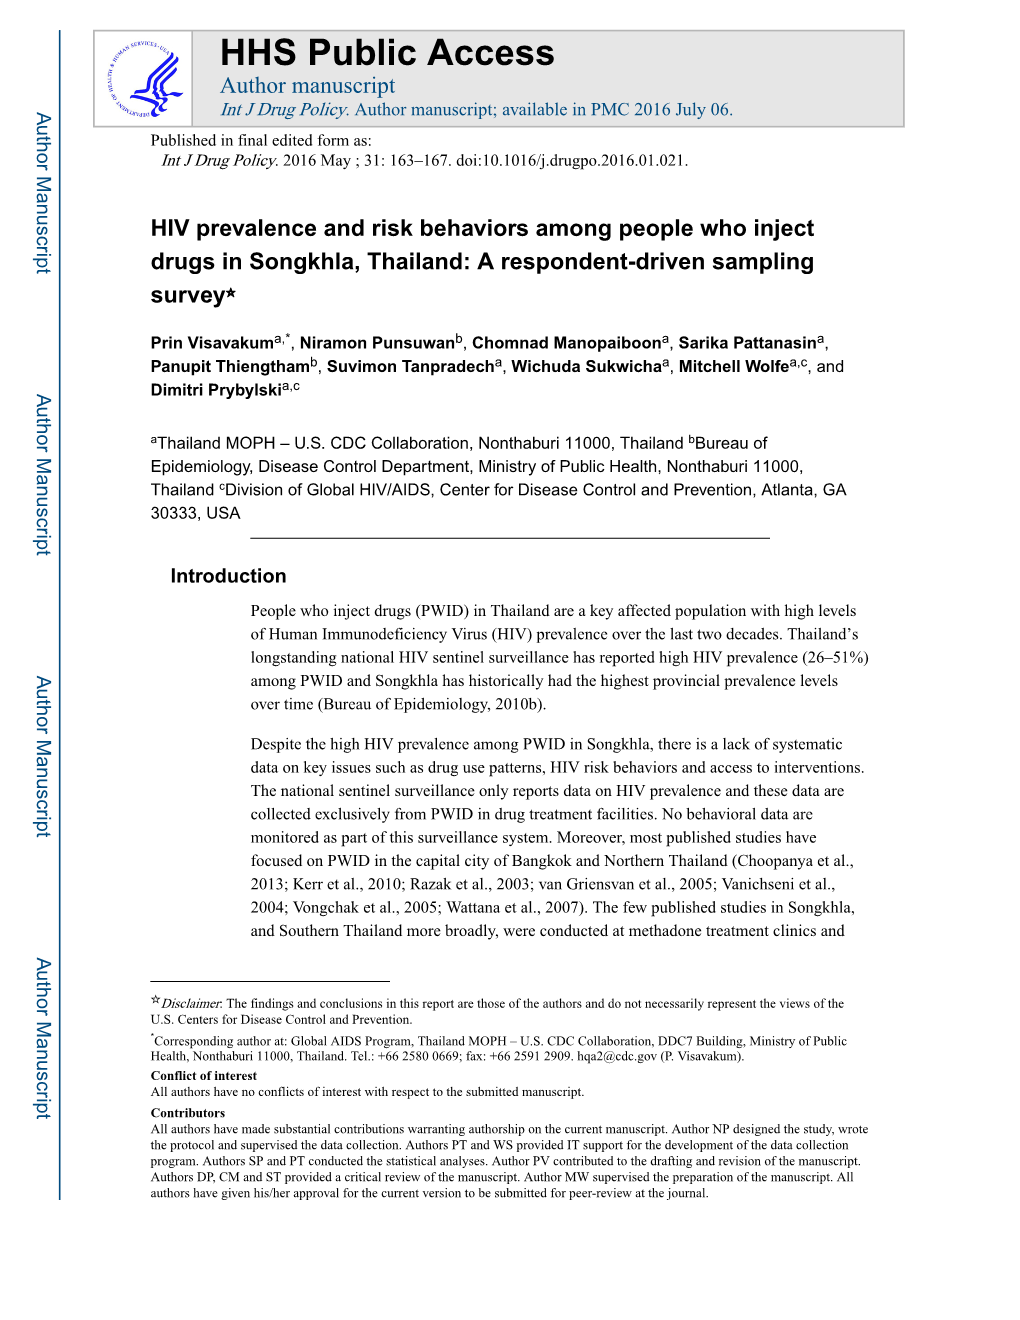 HIV Prevalence and Risk Behaviors Among People Who Inject Drugs in Songkhla, Thailand: a Respondent-Driven Sampling Survey☆